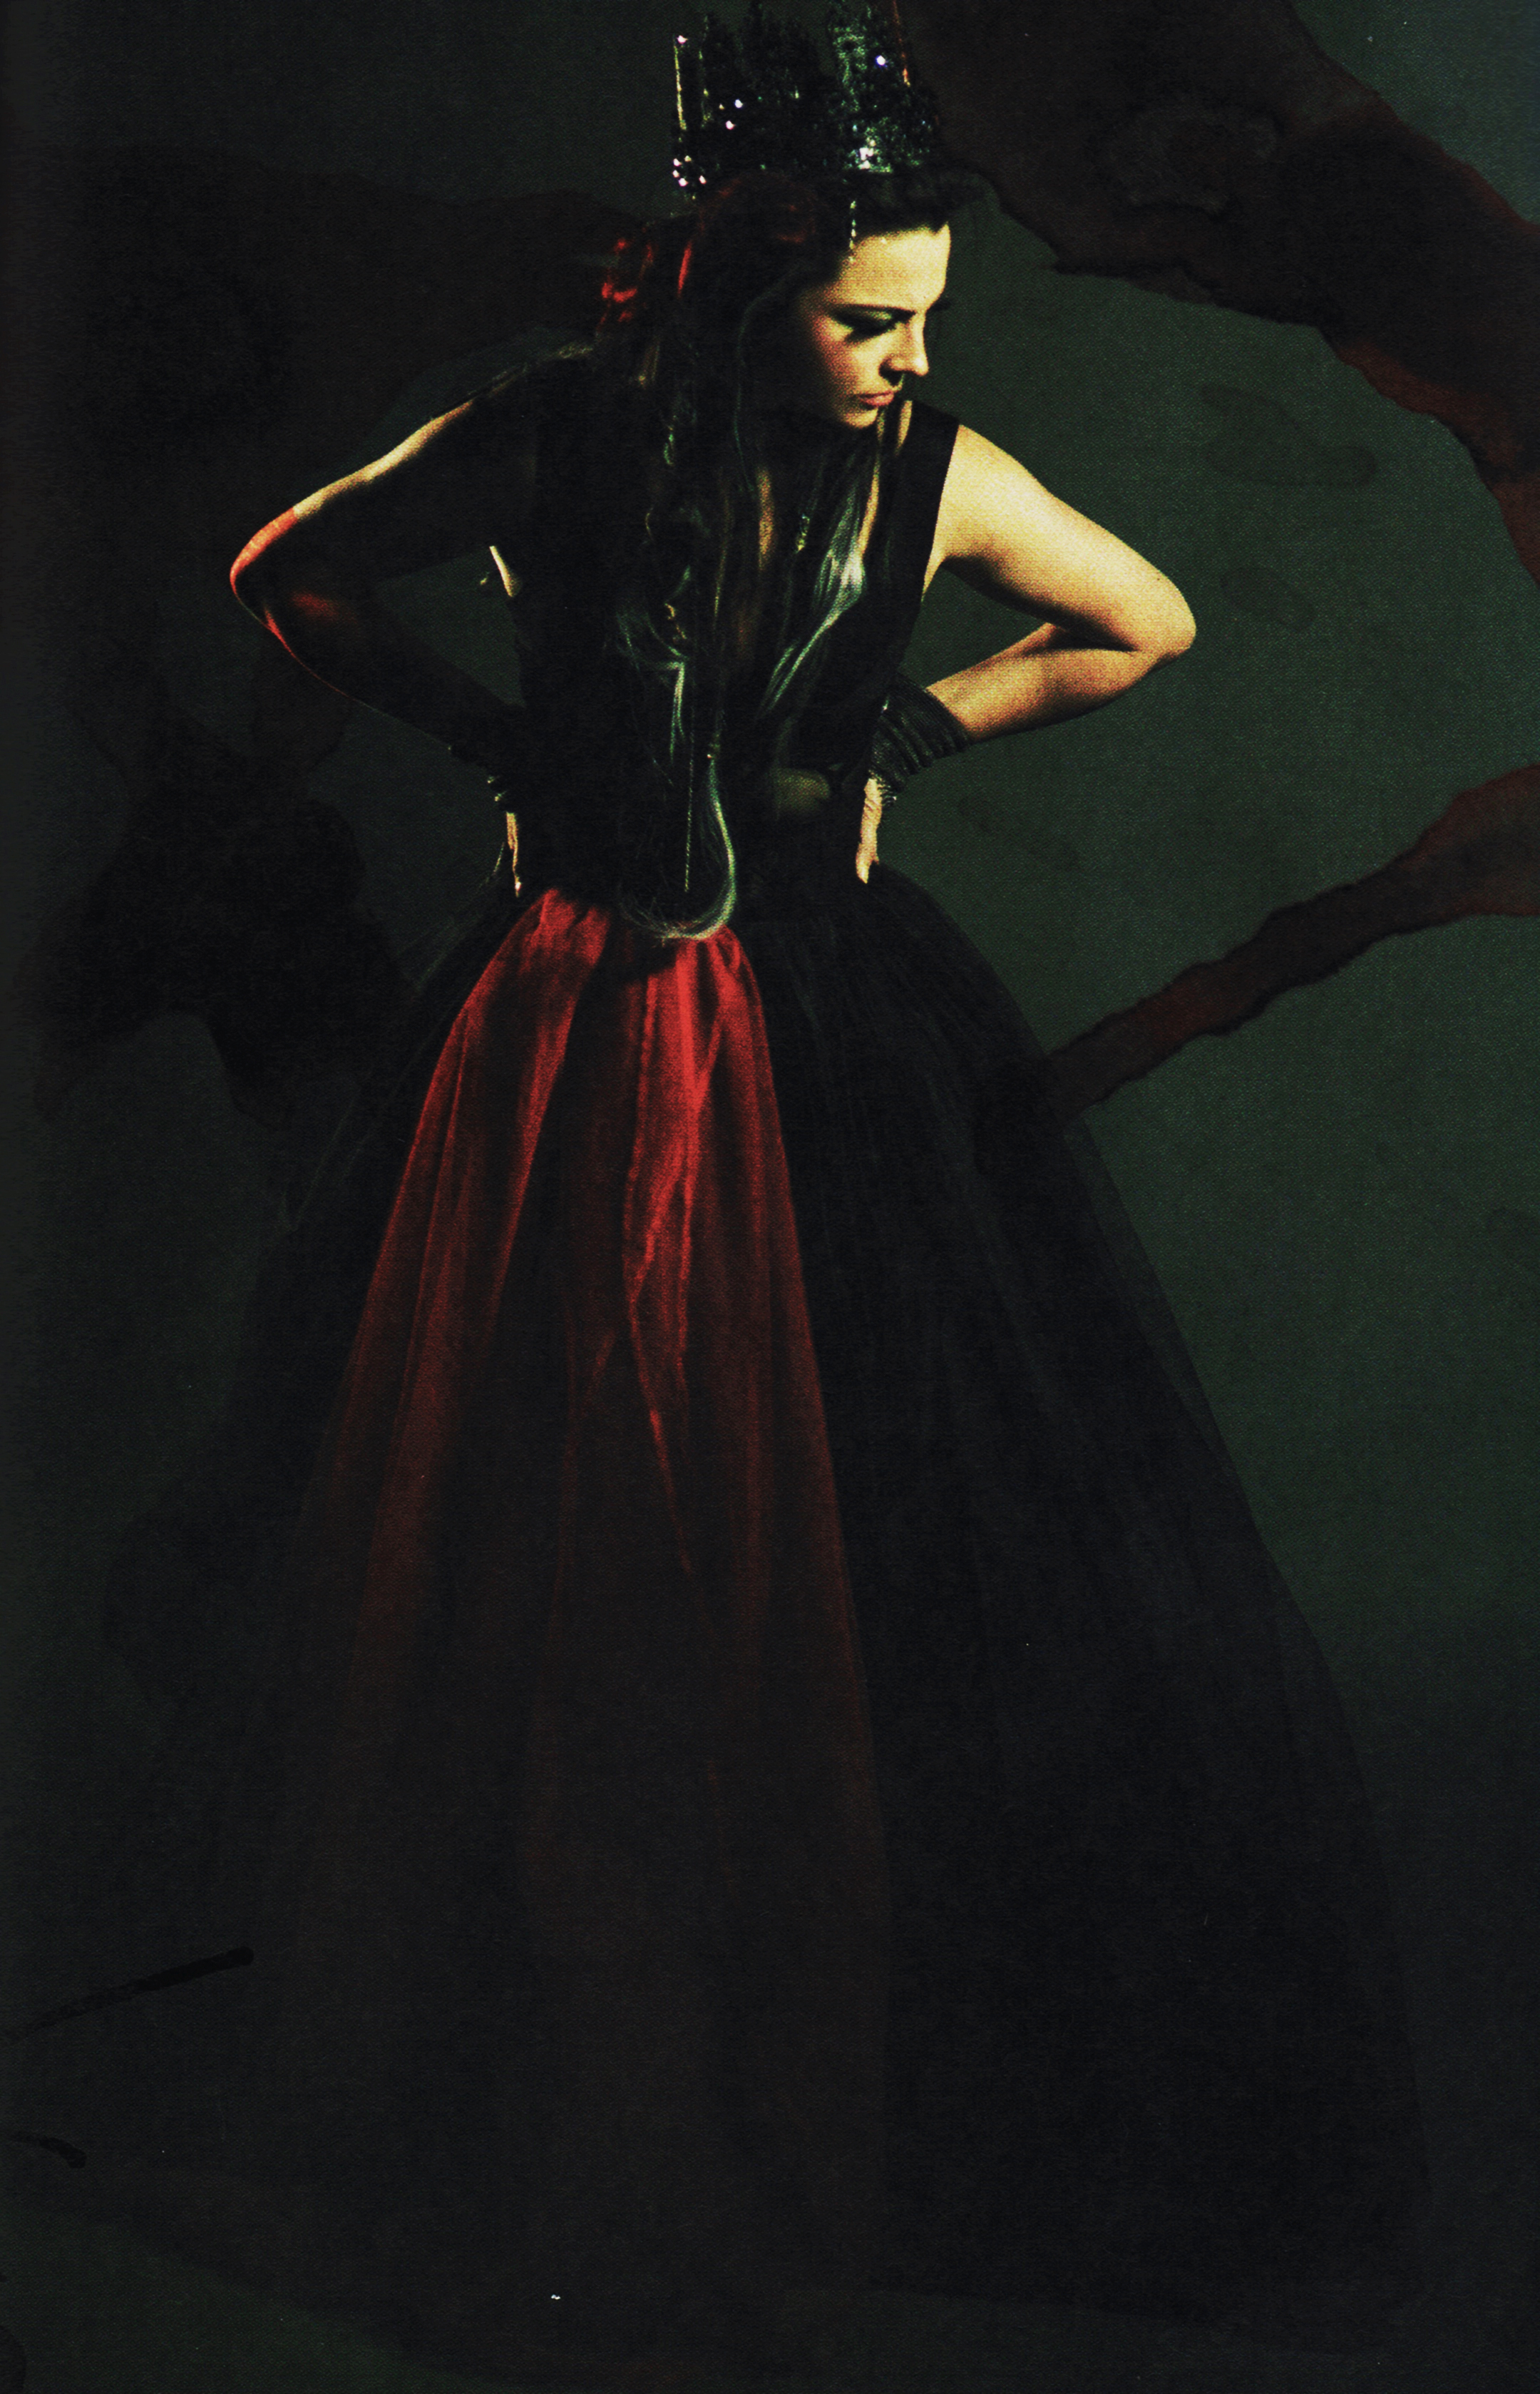 2160x3357
Keywords: synthesis;photoshoot;amy lee;scan